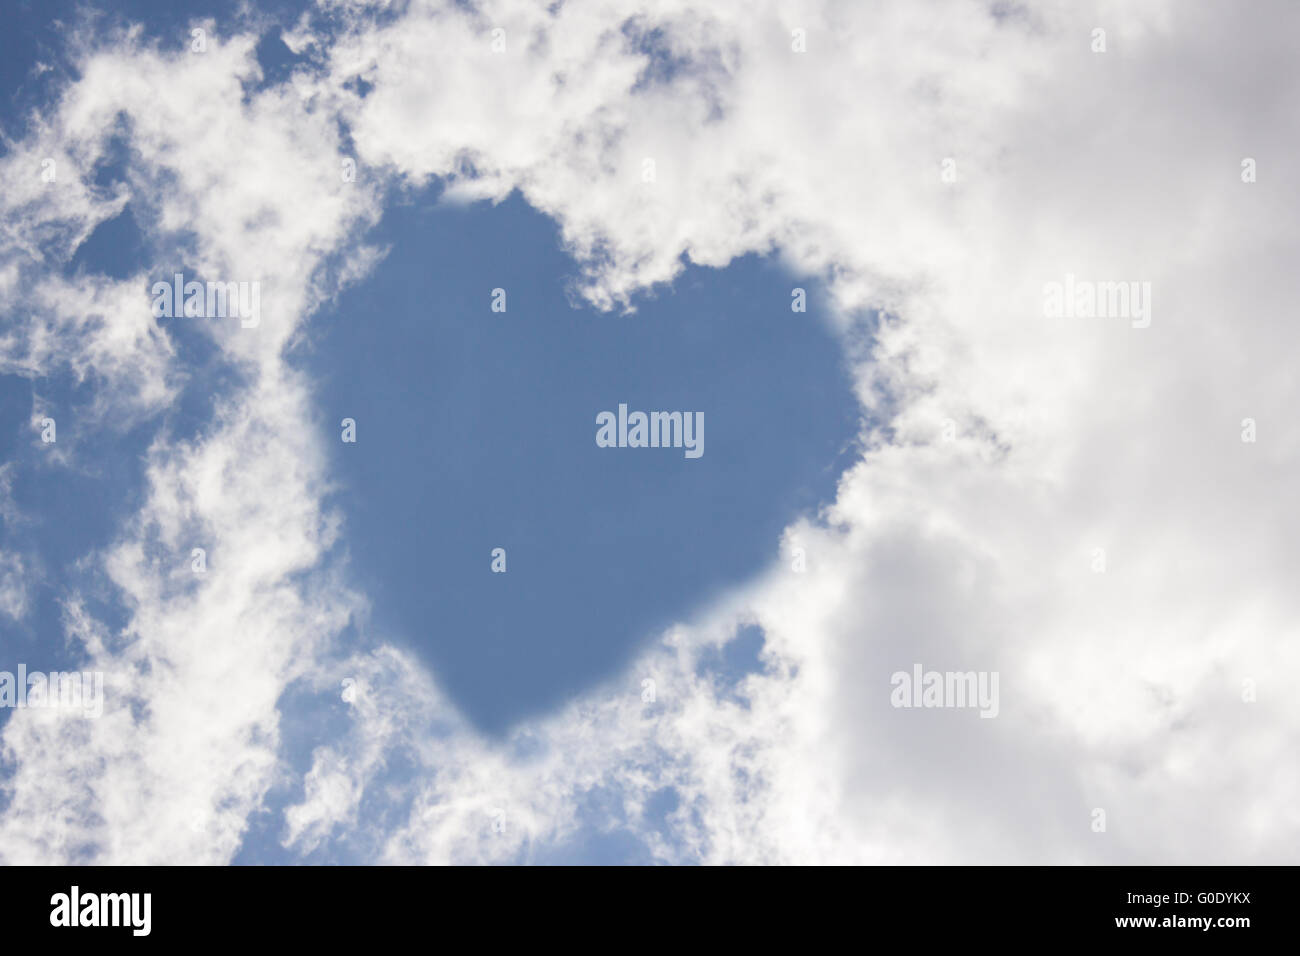 heart in the sky Stock Photo